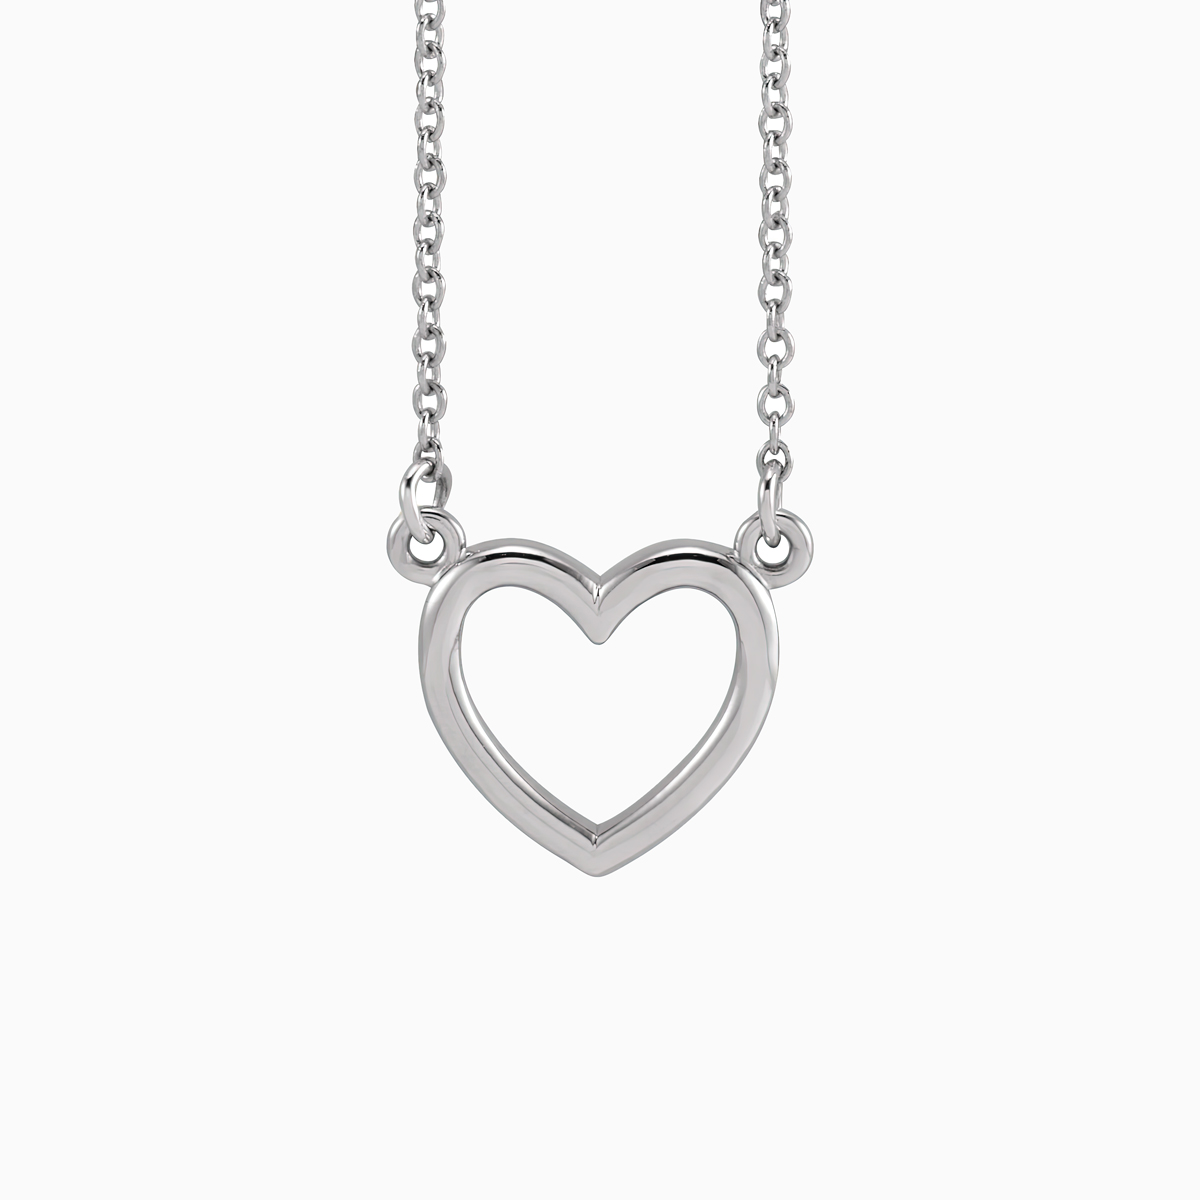 Gold Open Heart Necklace, 14k Gold